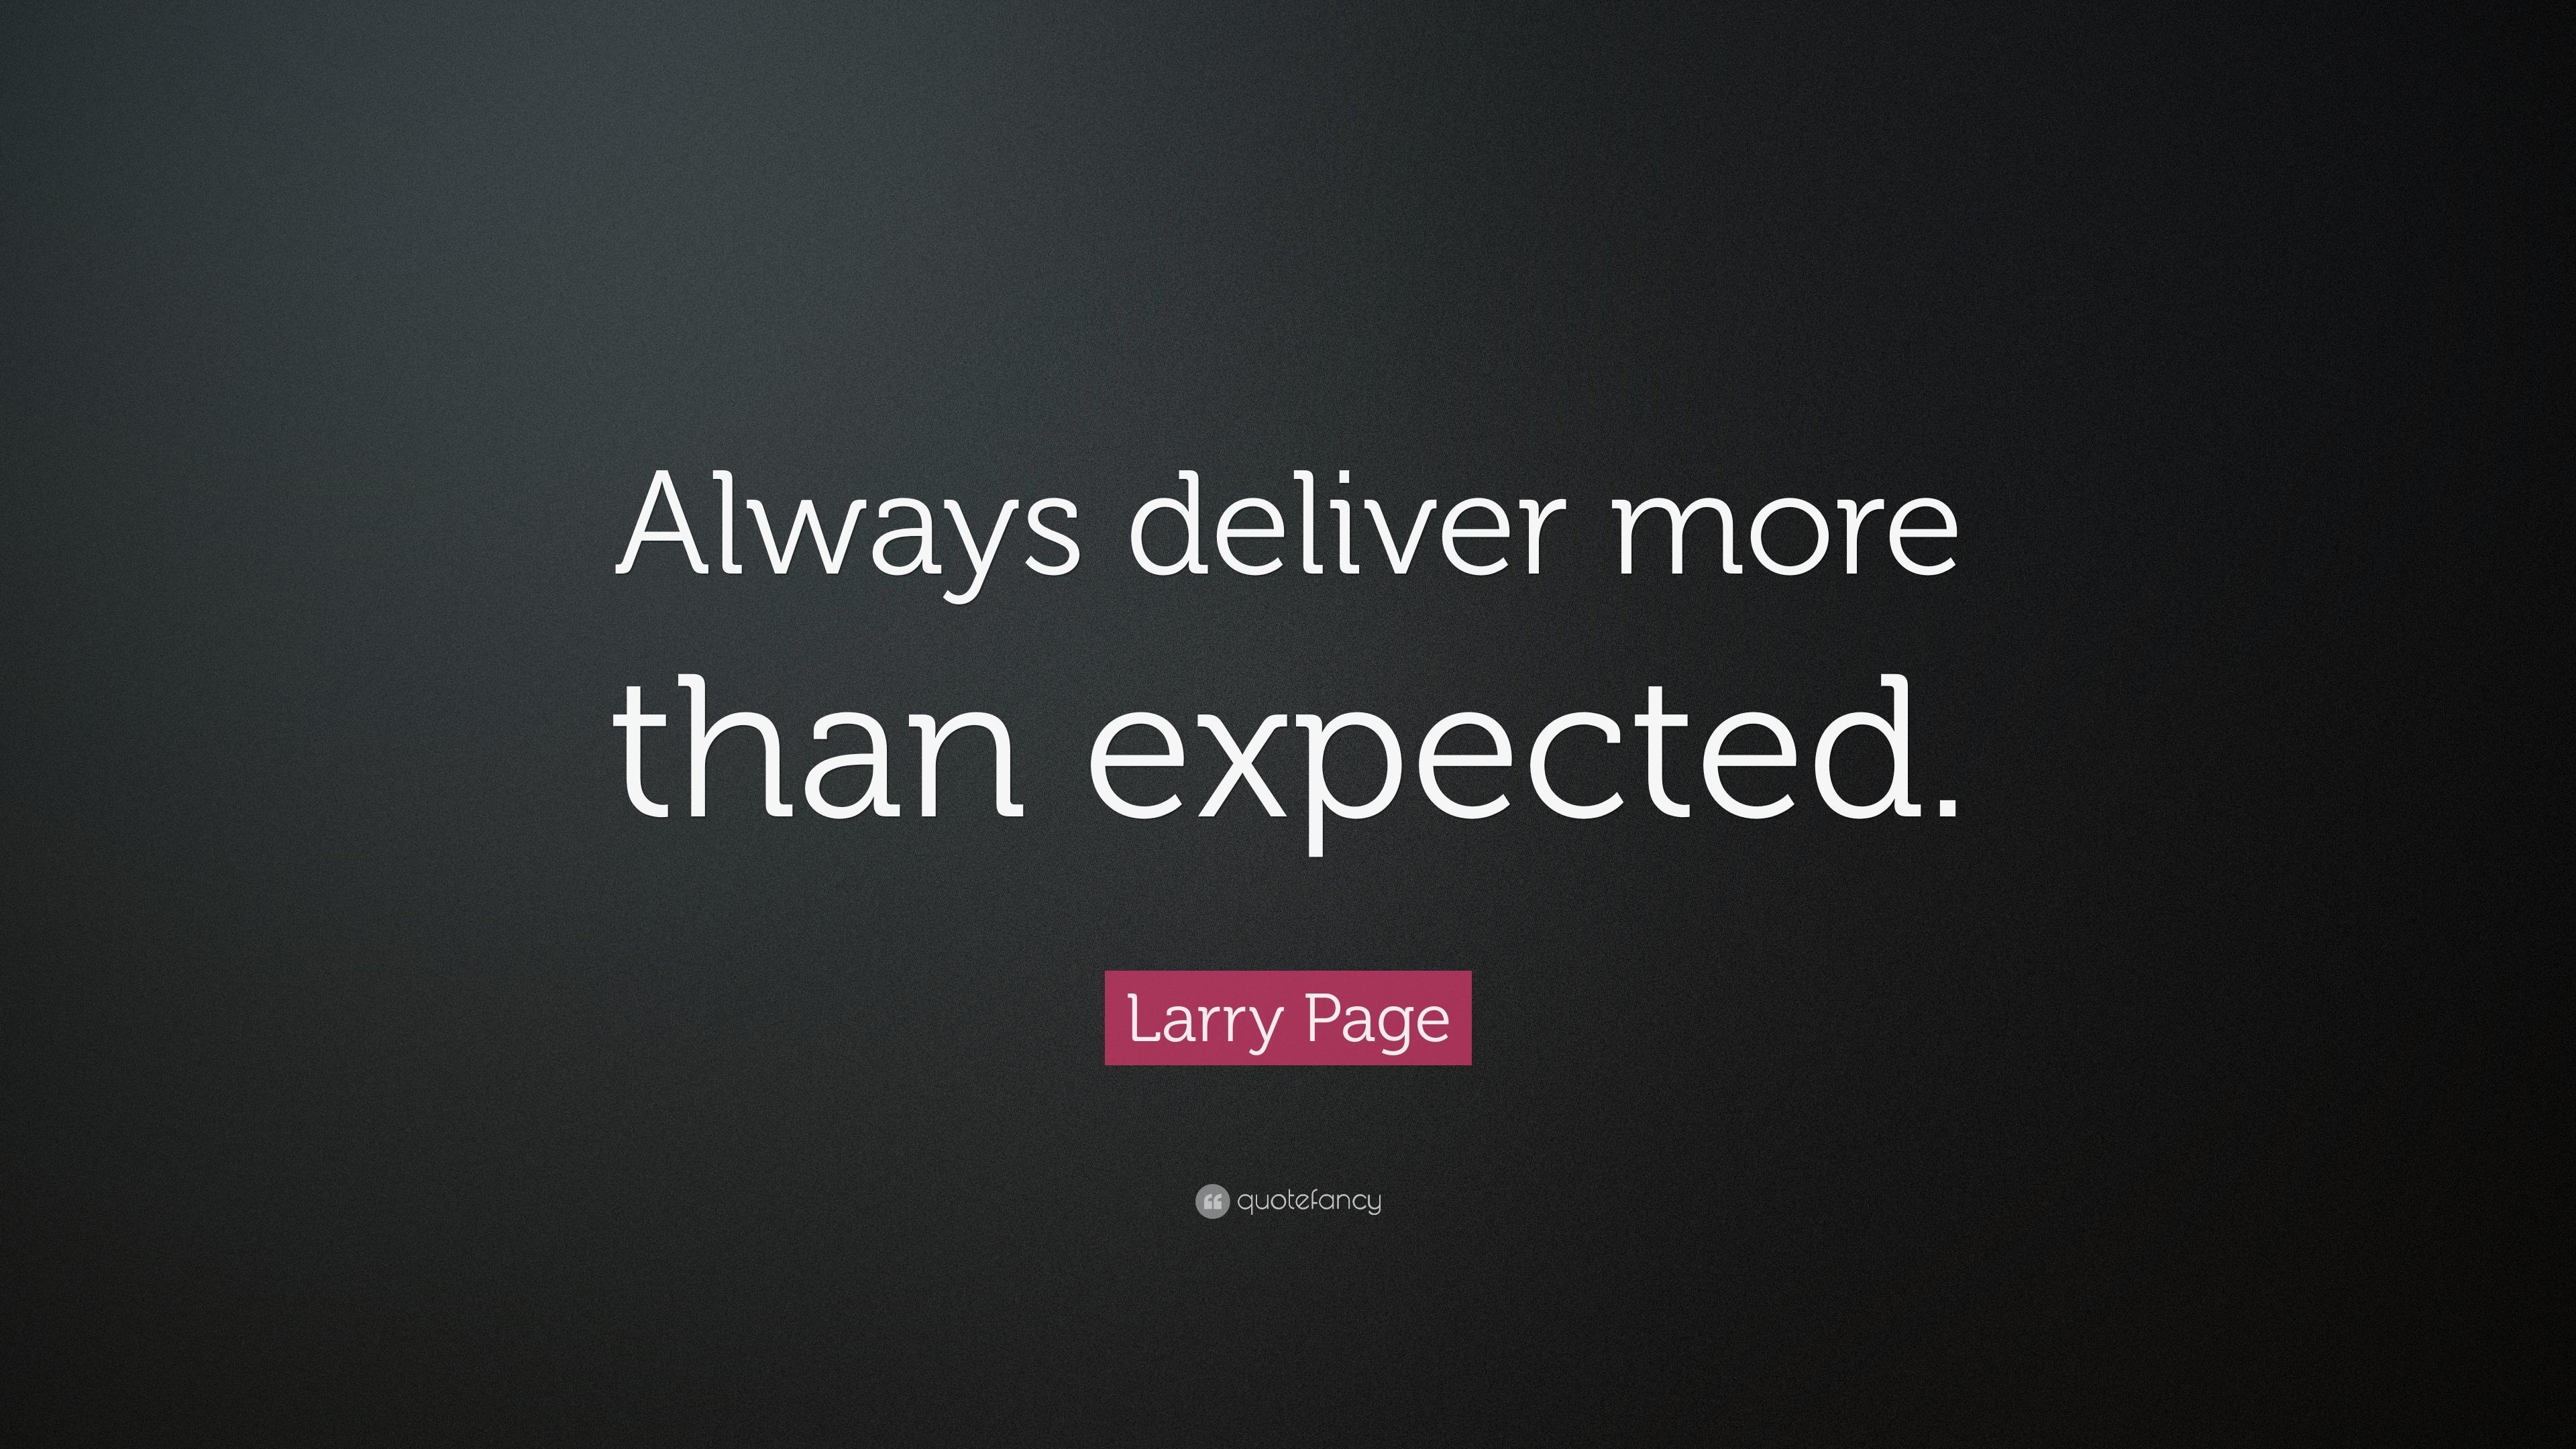 Larry Page Quotes (78 wallpaper)